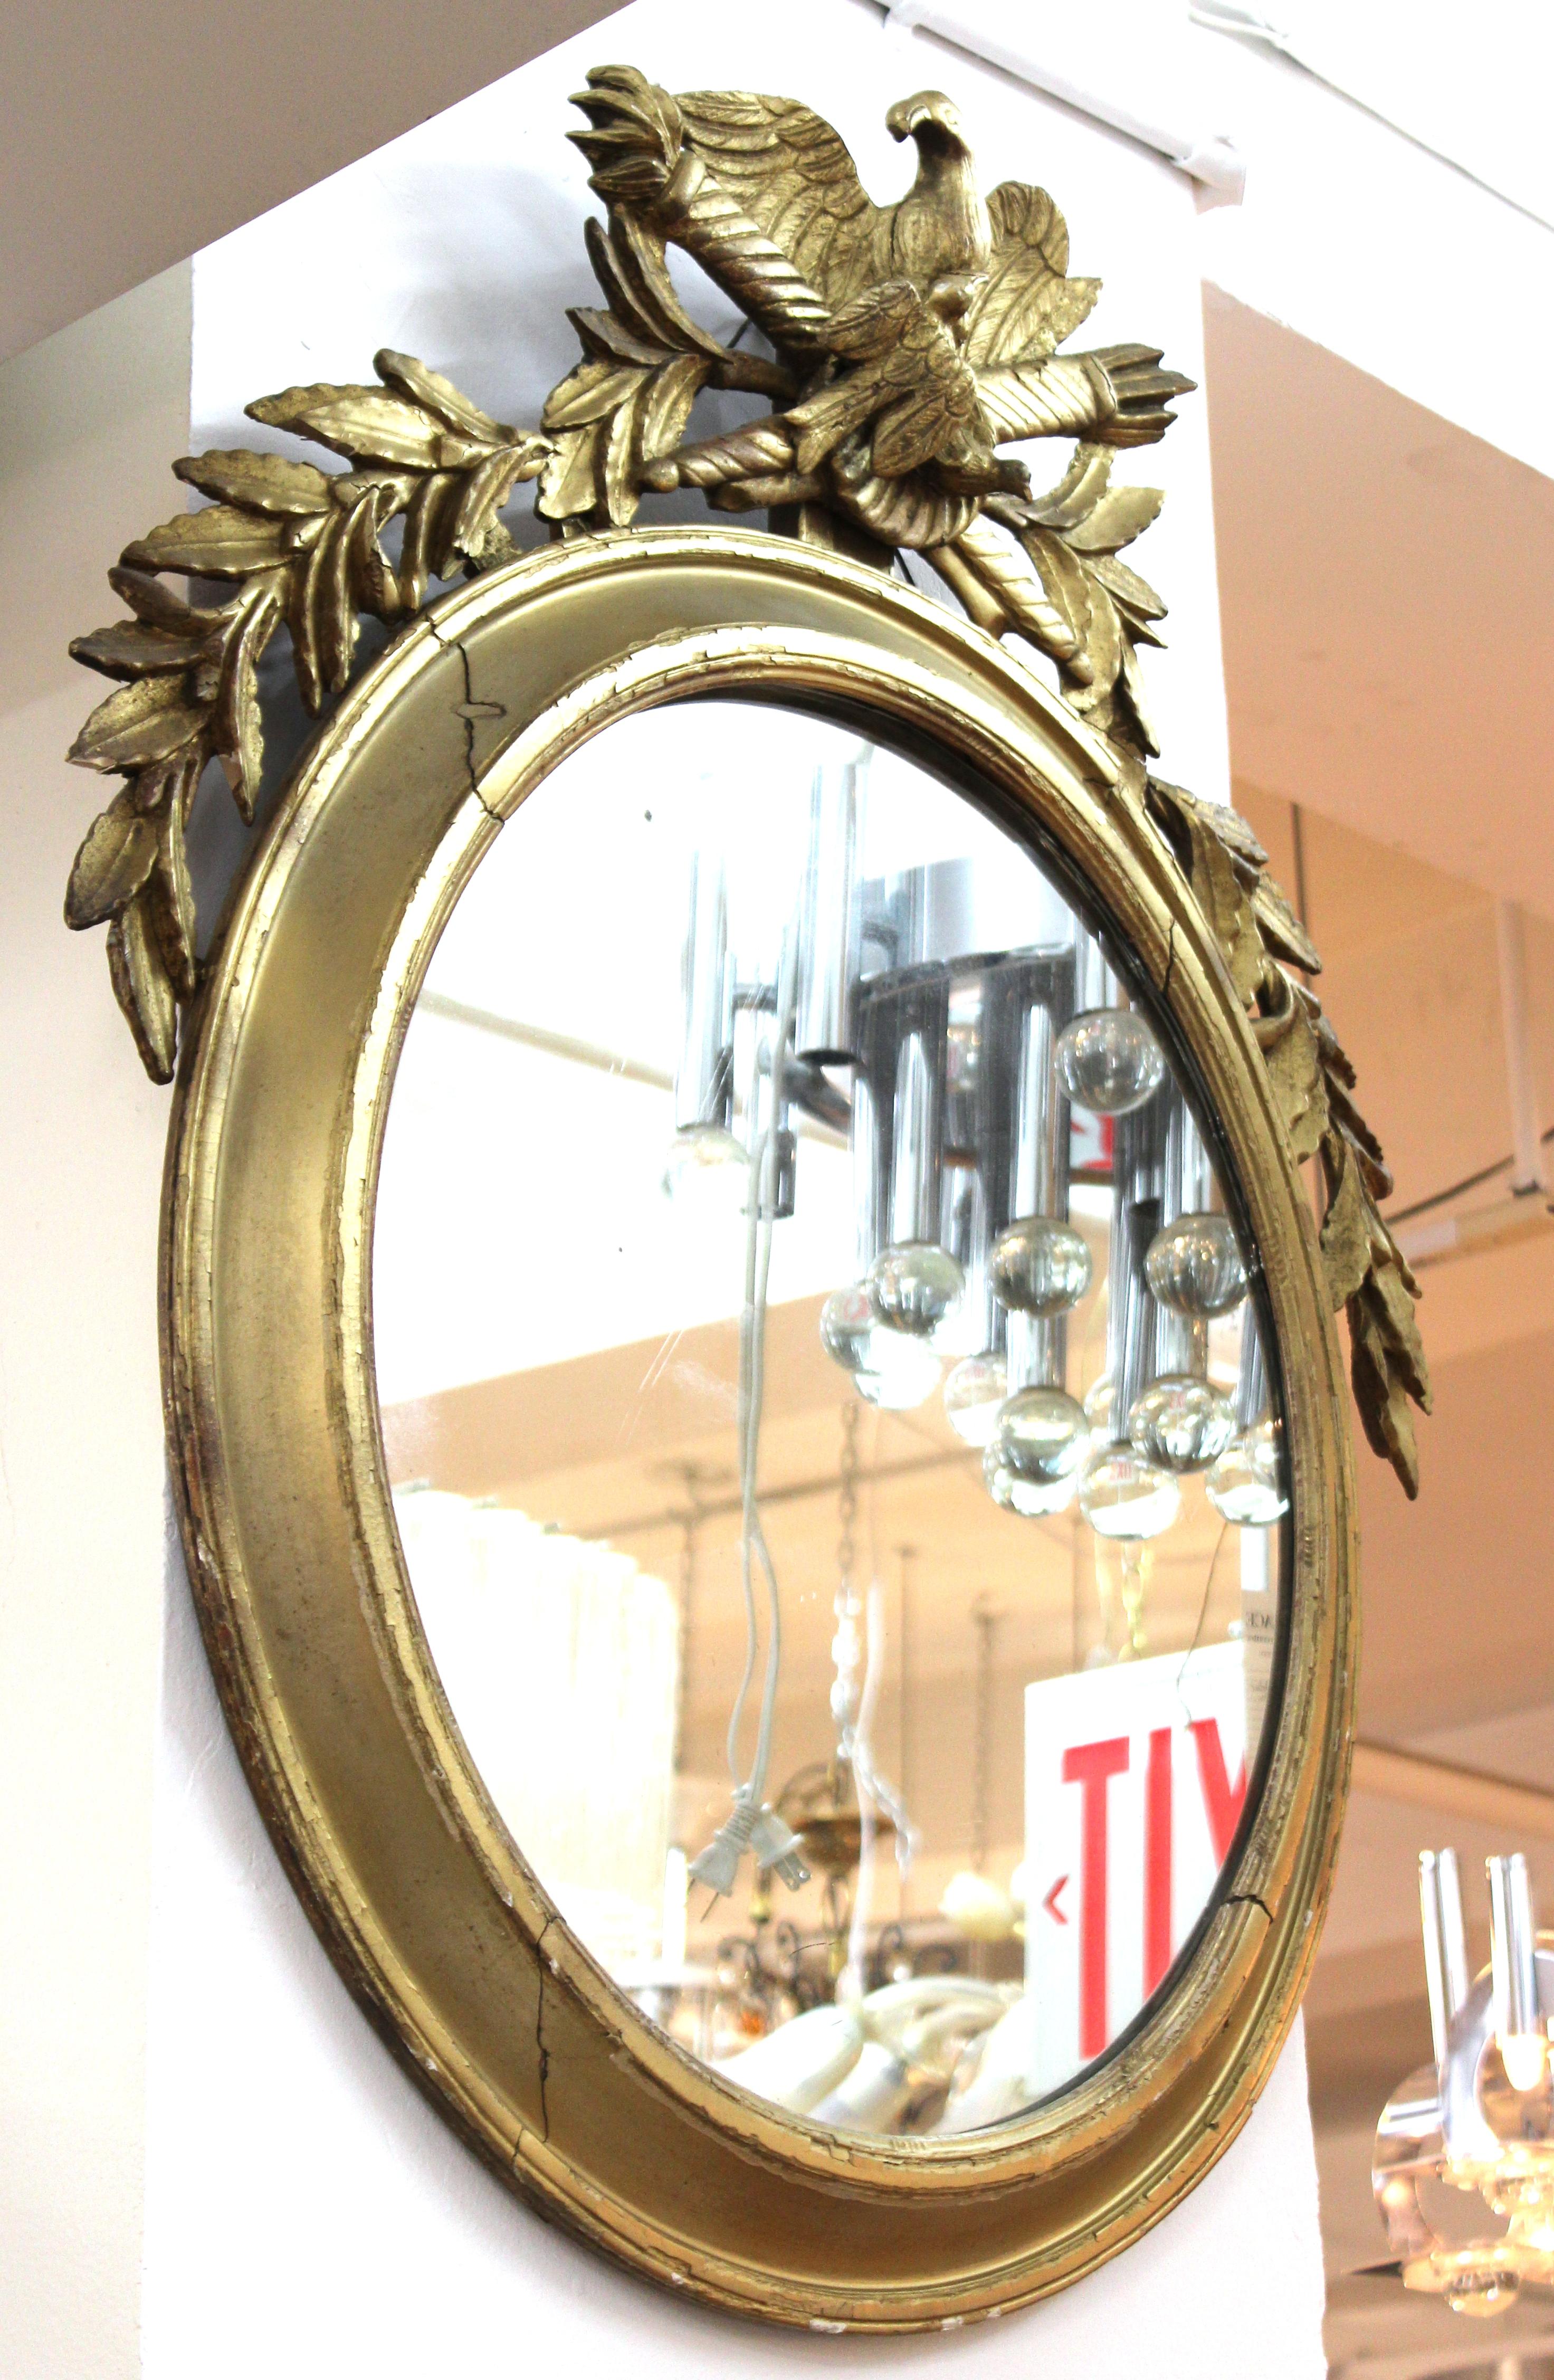 Continental neoclassical Revival oblong wall mirror in giltwood. The piece features trophies flanking an eagle on top. Made in the 19th century.

Dealer: S138XX